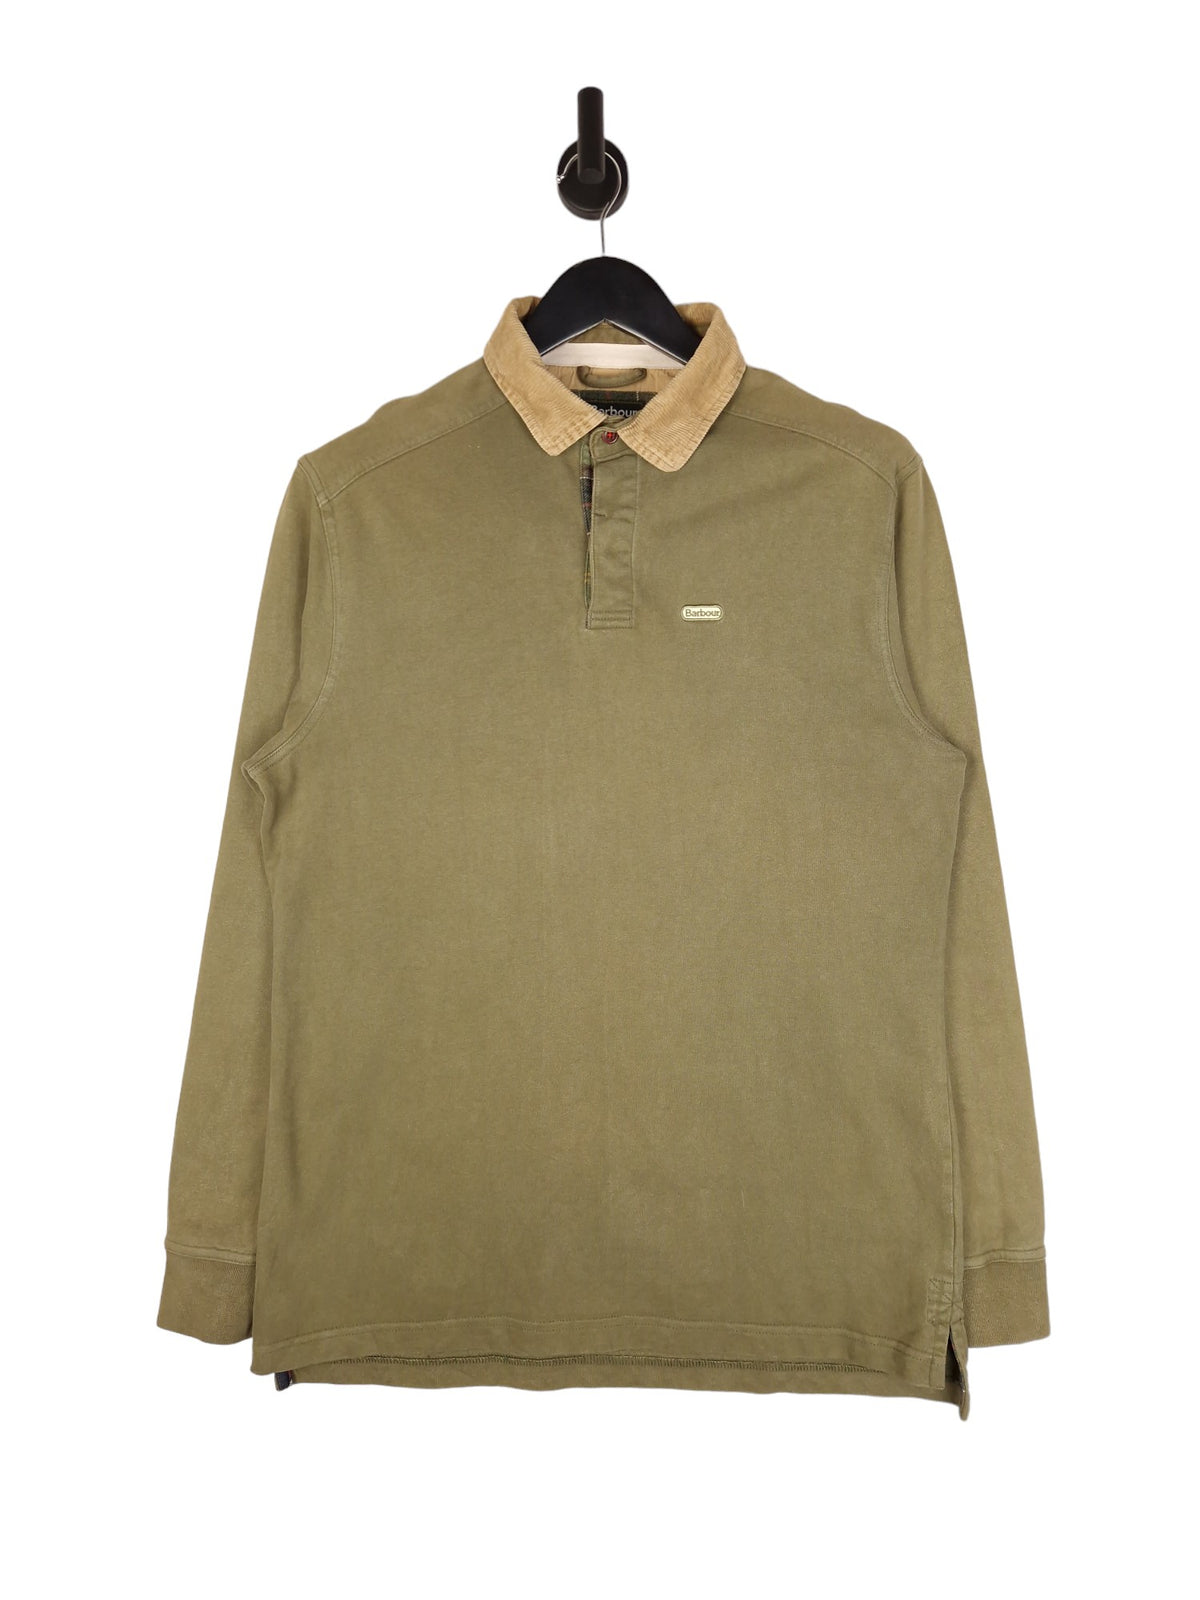 Barbour Long Sleeve Polo Shirt - Size XL